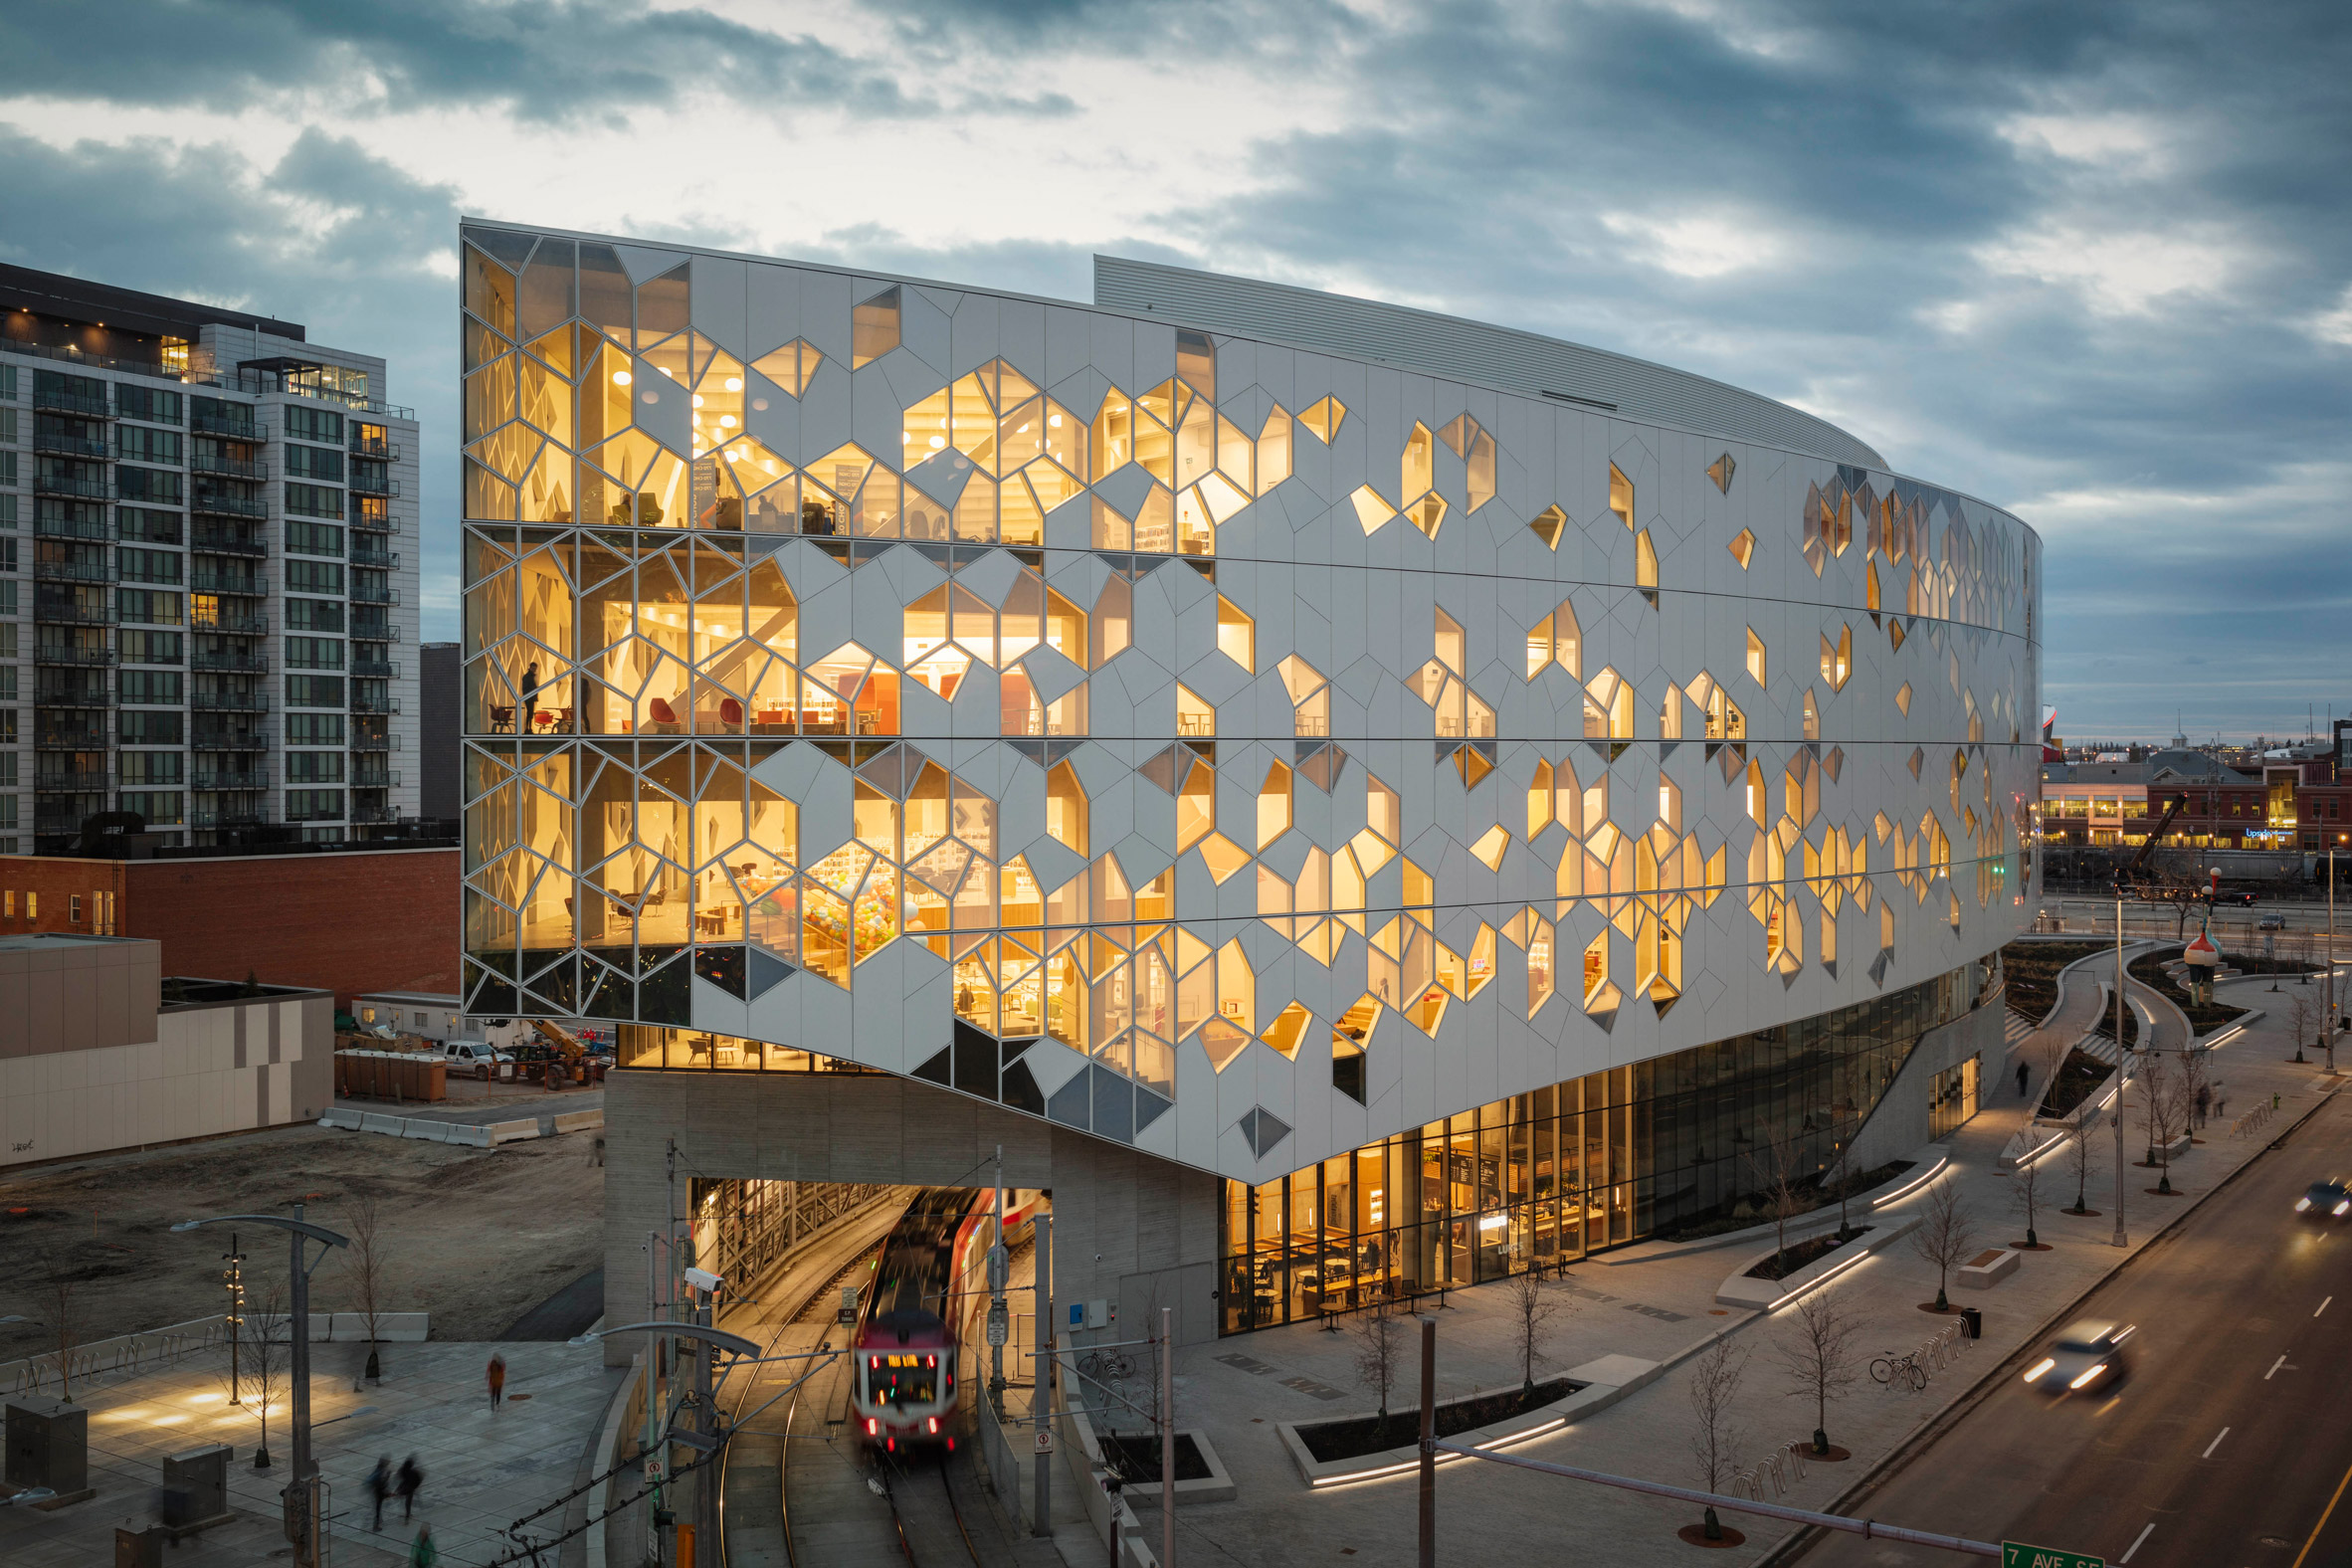 "Calgary's New Central Library is an example of the best practices in modern monument making"